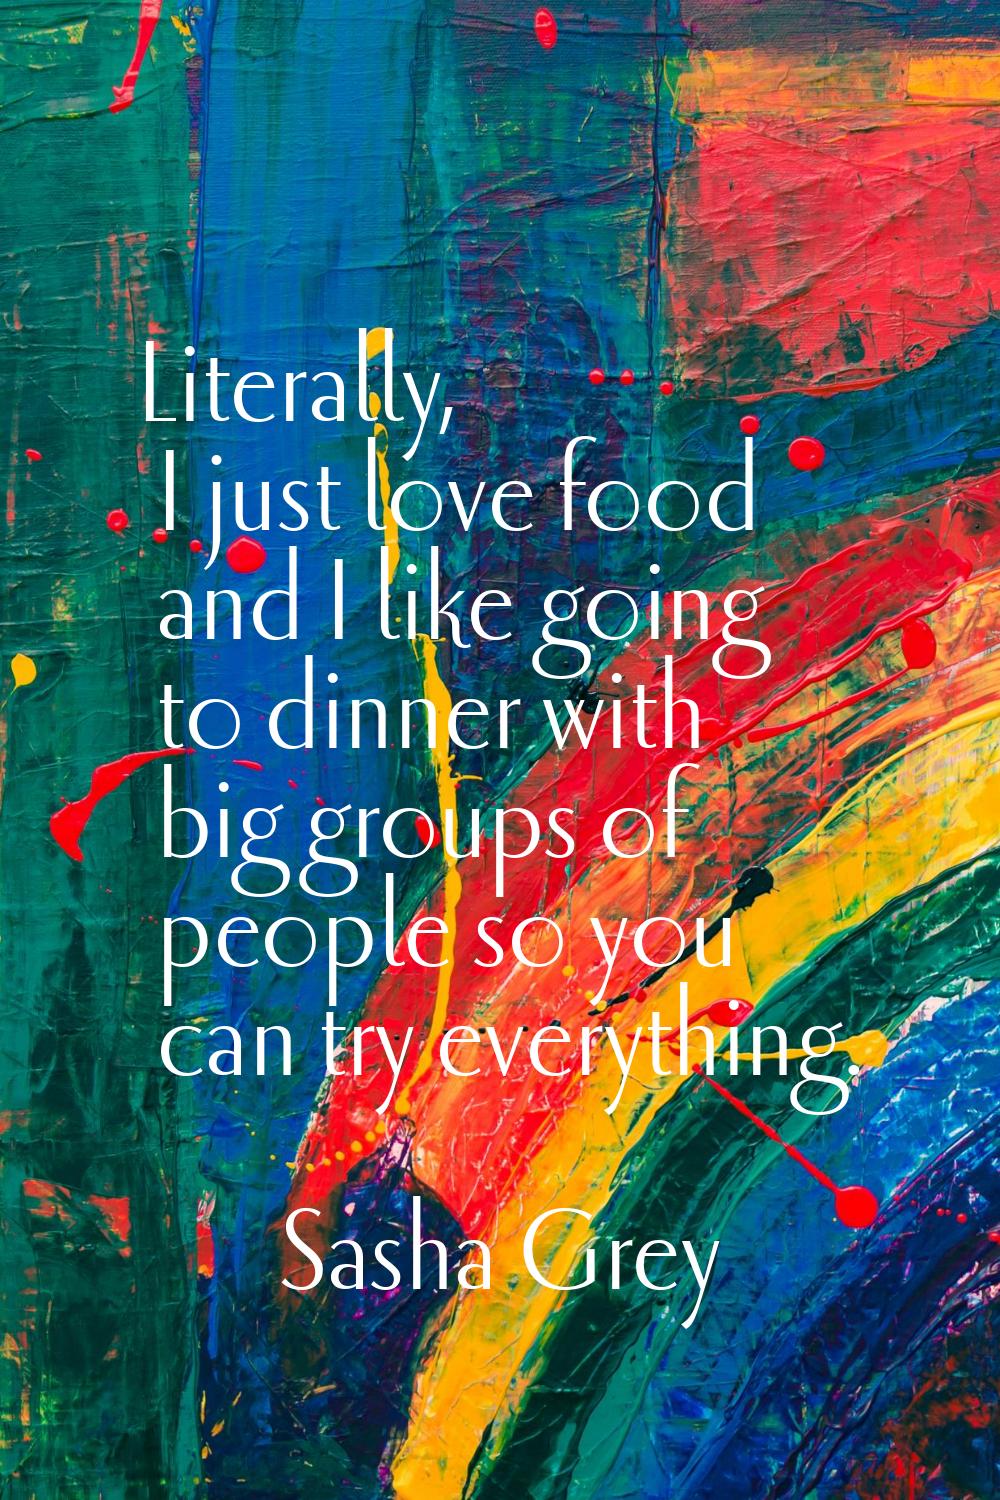 Literally, I just love food and I like going to dinner with big groups of people so you can try eve